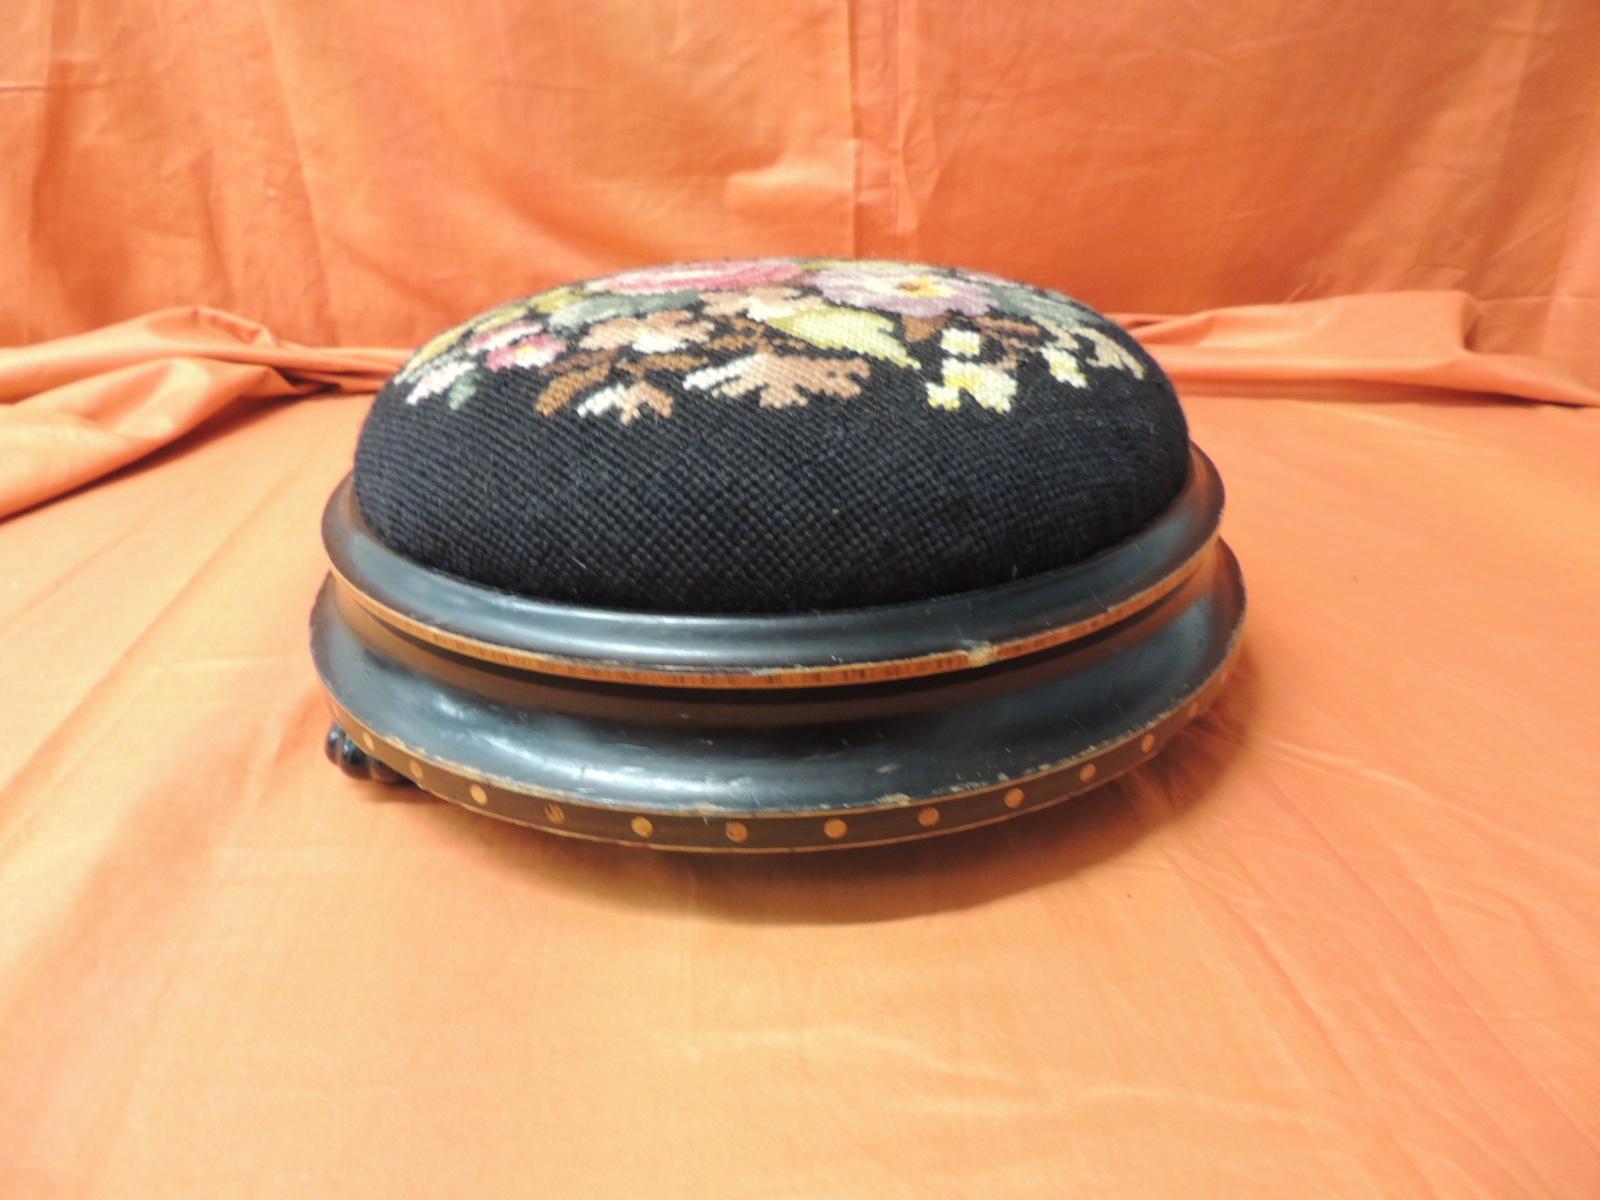 19th century English round footstool
Round footstool upholstered in a black floral tapestry. 
The ebonized wood base has inlaid all around.
Black glass feet in the shape of a flower
Size: 12 D x 4.5 H.
 